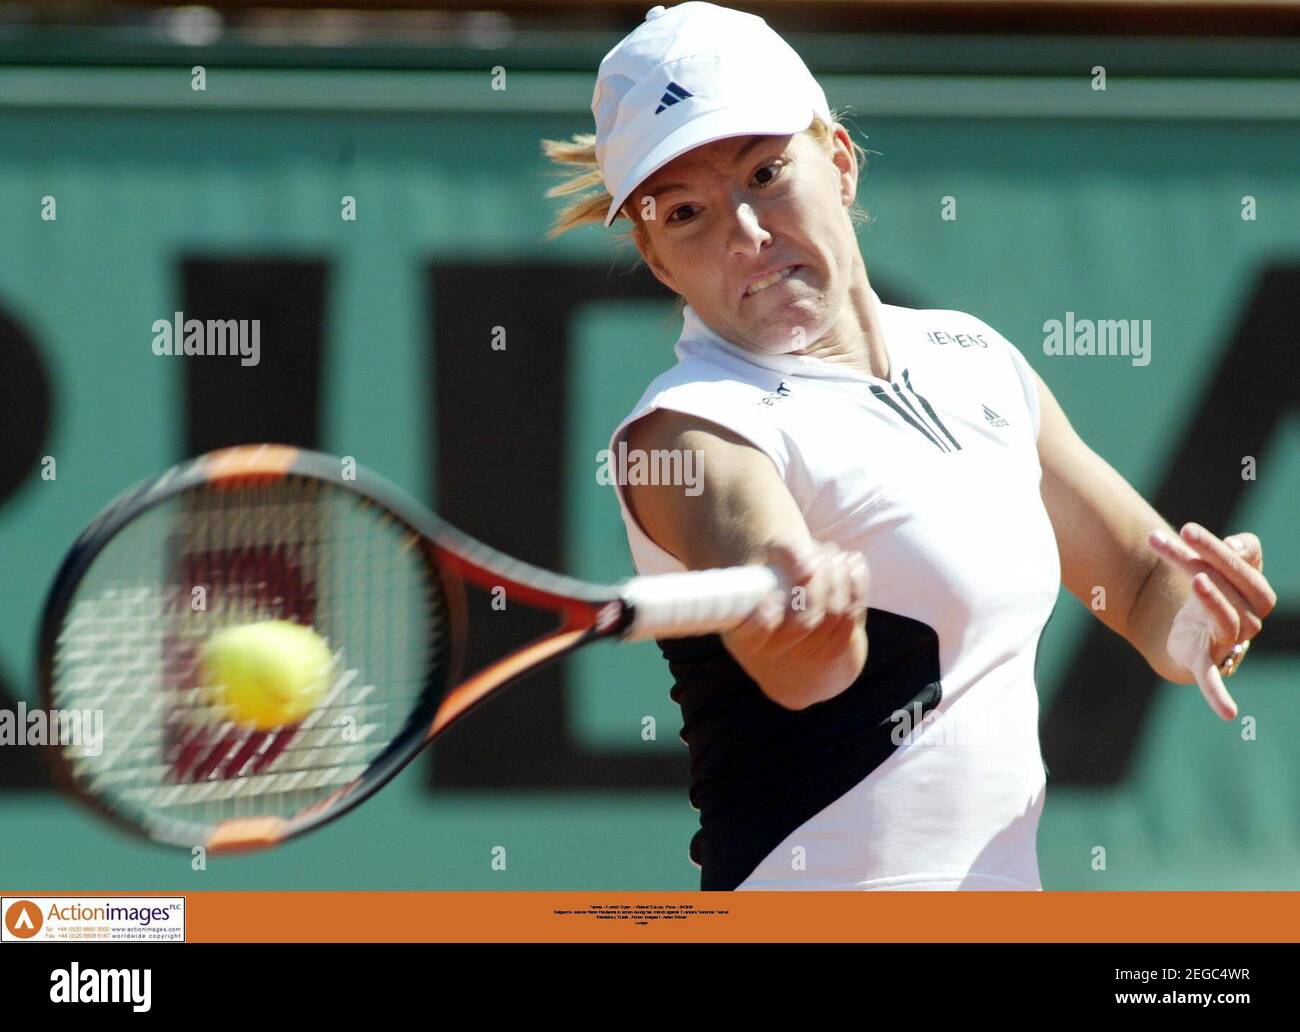 Tennis - French Open - Roland Garros, Paris - 24/5/04 Belgium's Justine  Henin Hardenne in action during her match against France's Sandrine Testud  Mandatory Credit: Action Images / Jason O'Brien Livepic Stock Photo - Alamy